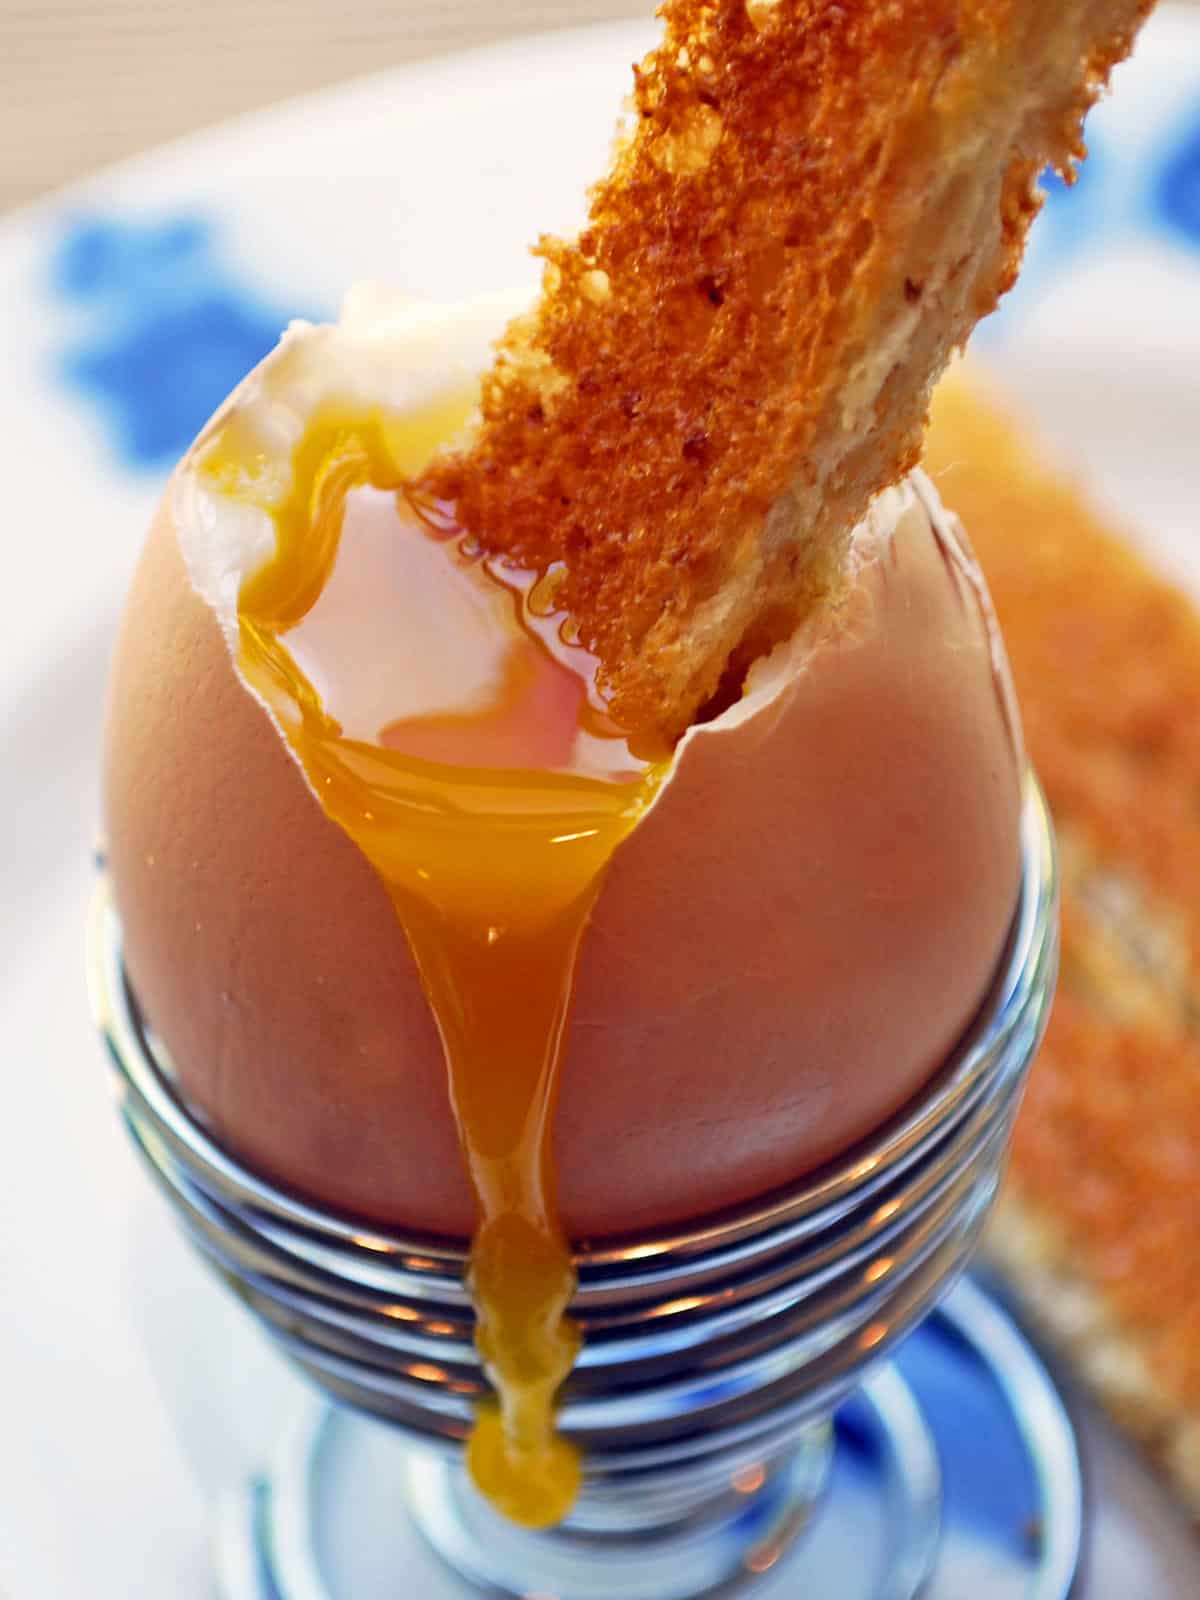 Toast dipped into the thick yolk of a soft-boiled egg. 